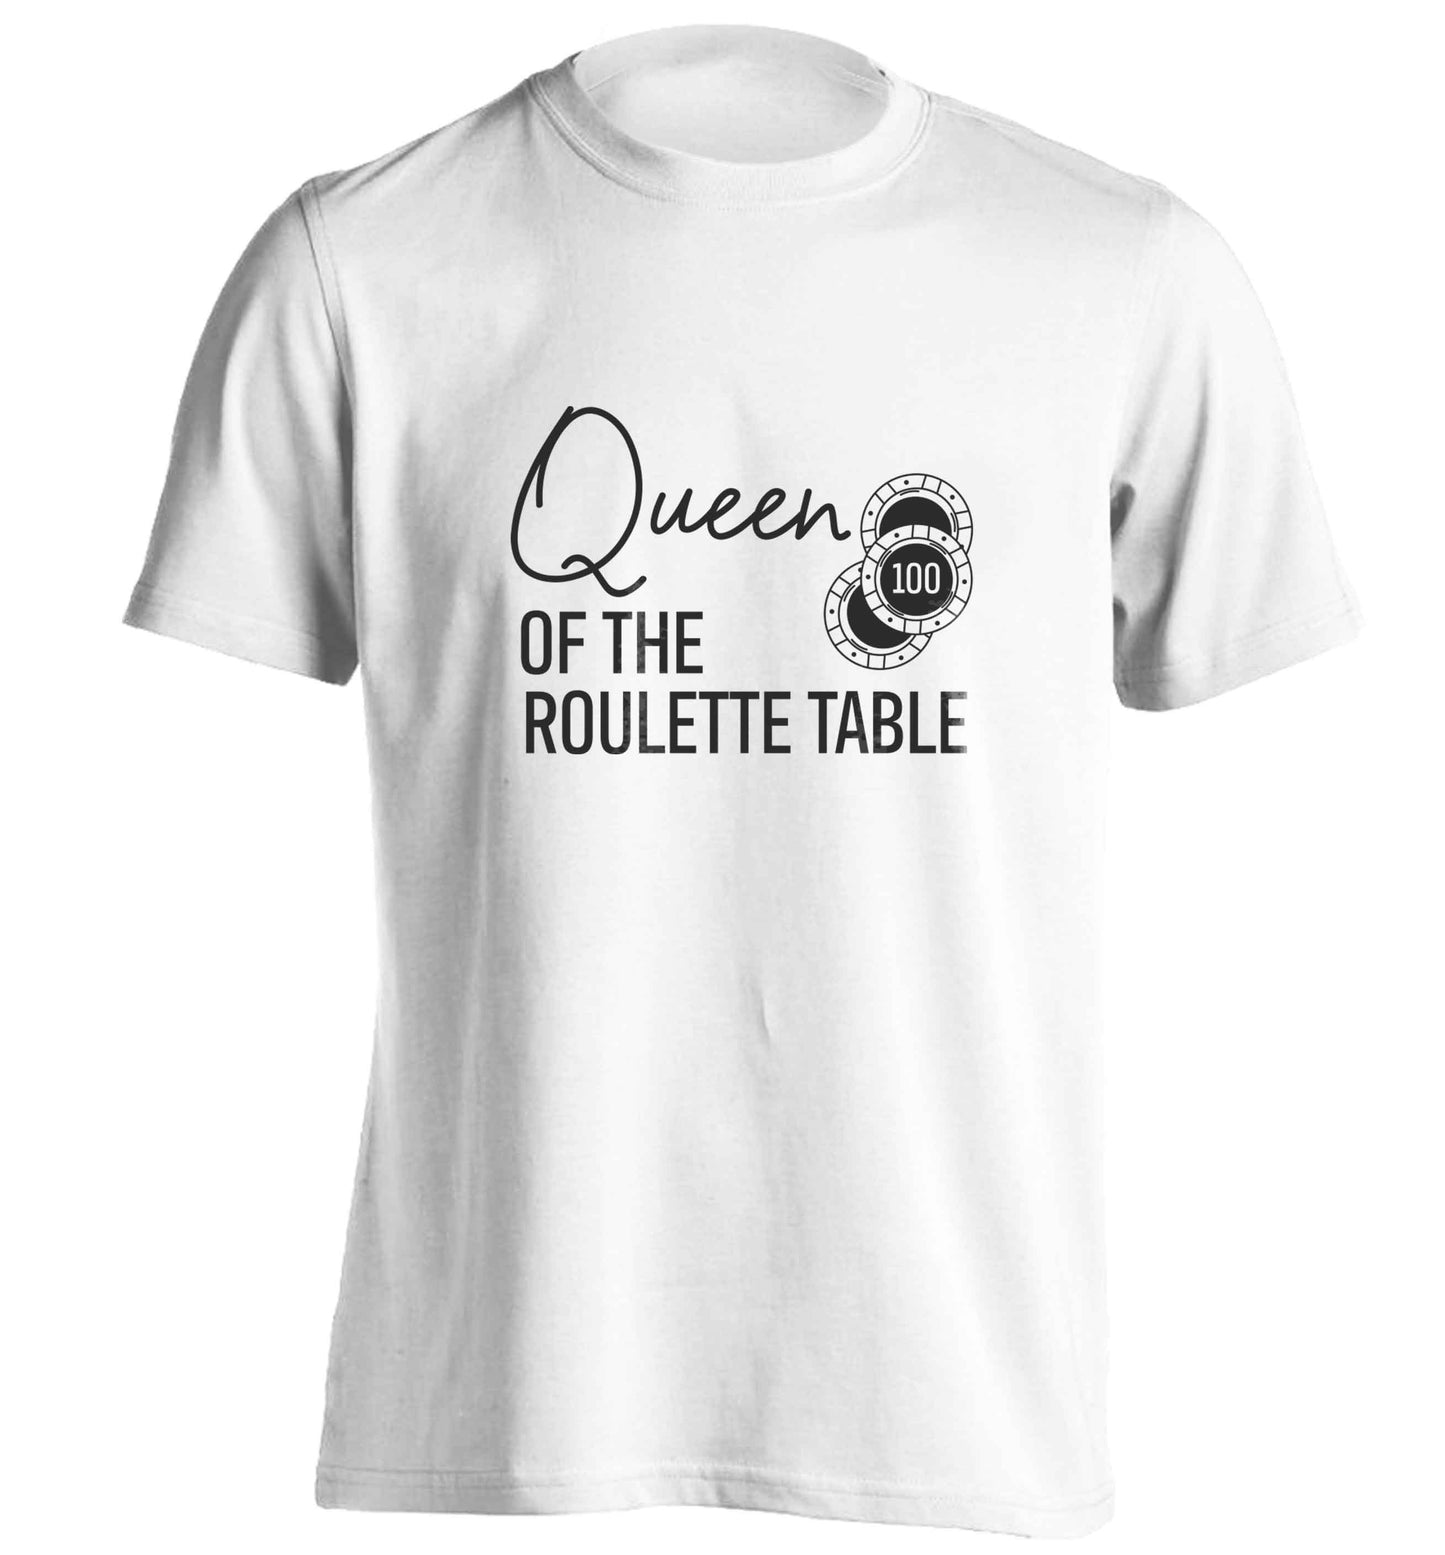 Queen of the roulette table adults unisex white Tshirt 2XL